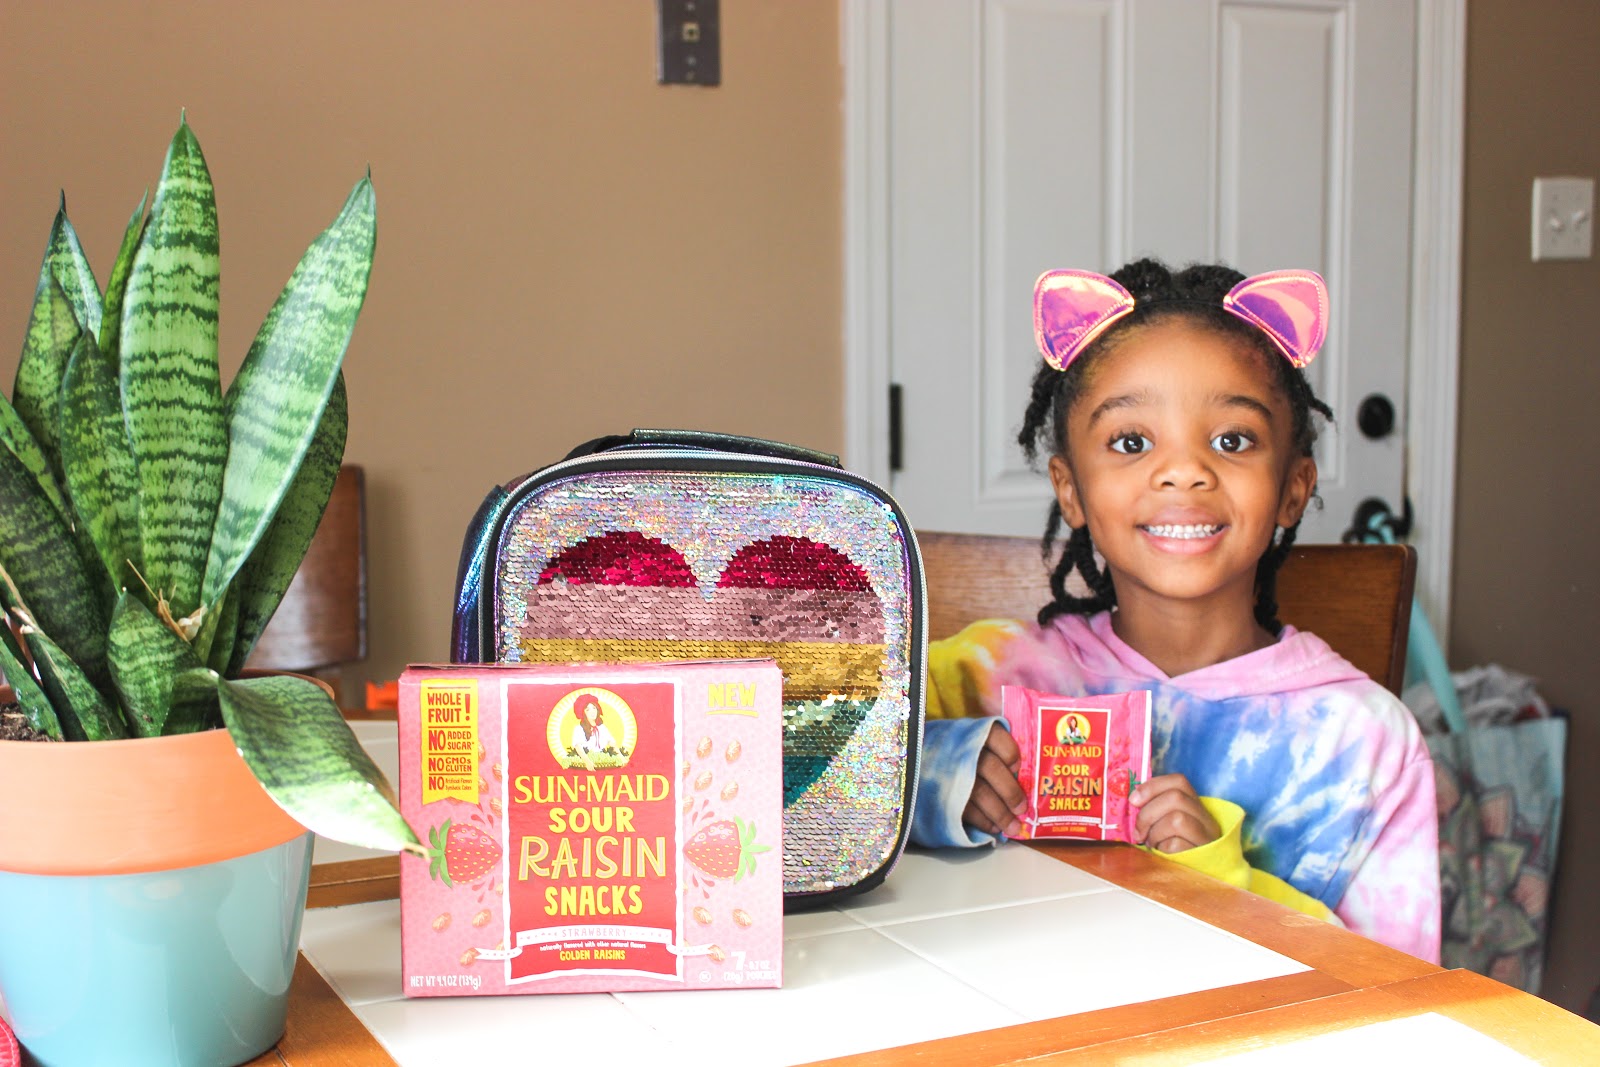 Girl with colorful shirt holding Sun-Maid Sour Raisin Snacks at table with lunchbox 